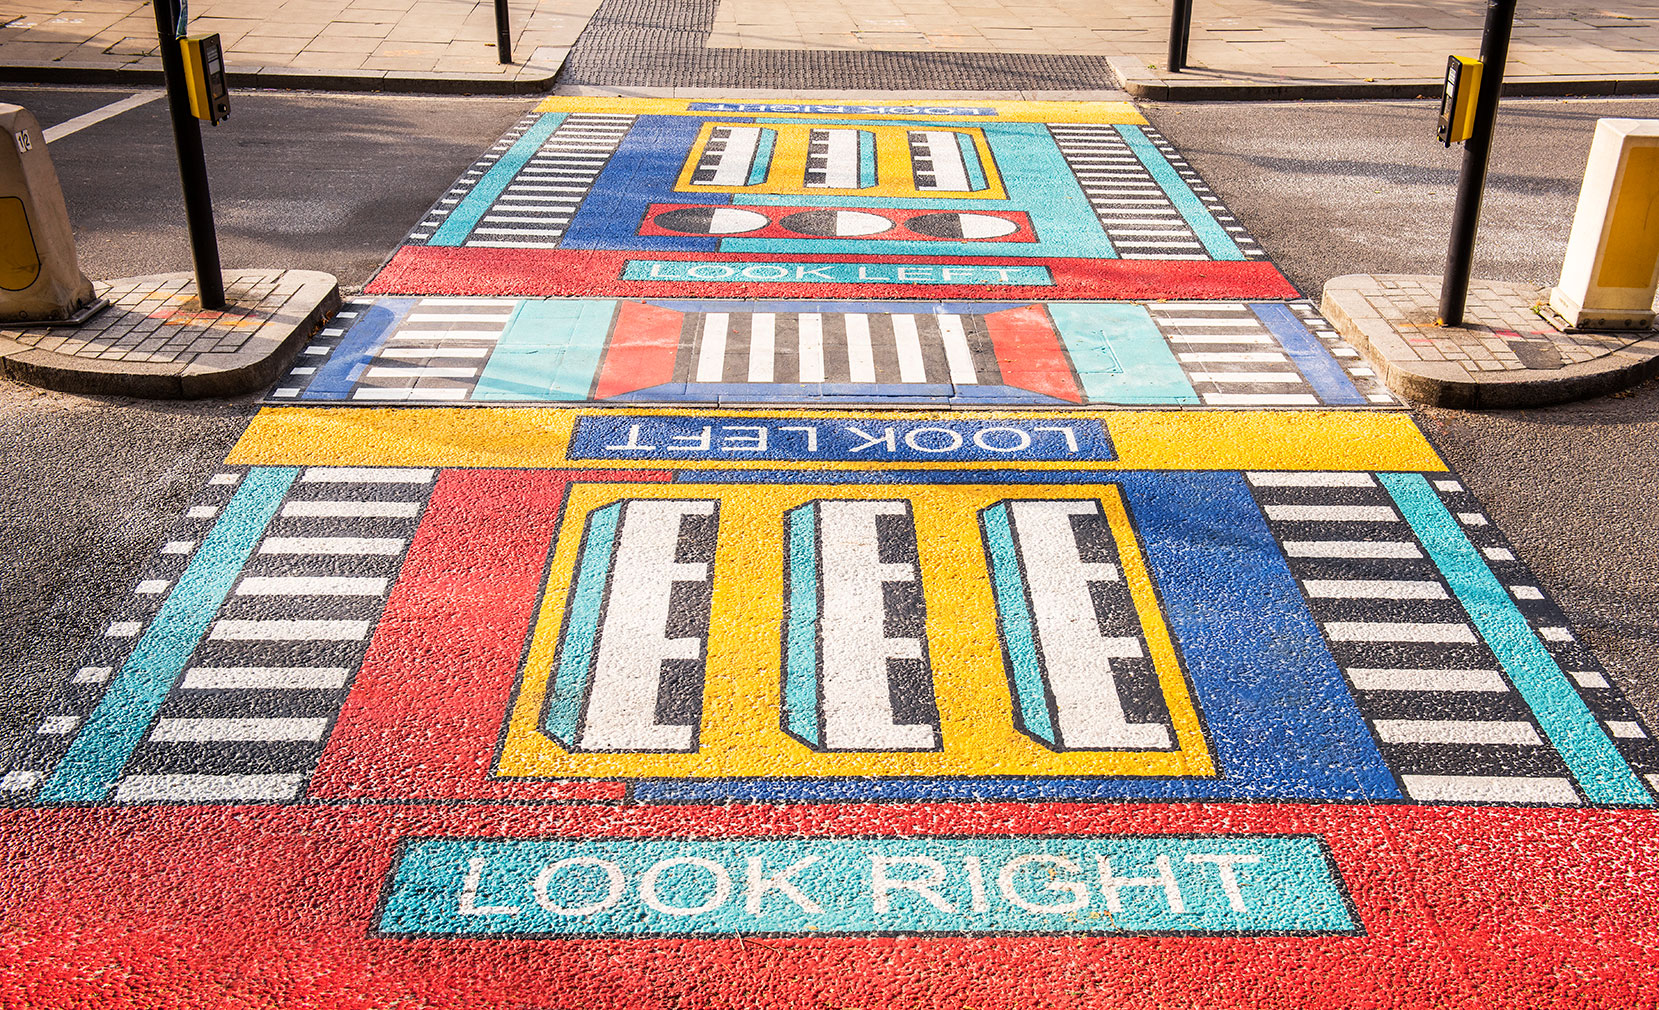 There’s an eye-catching new addition to West London’s streetscape – French designer Camille Walala has installed a pair of colourful patterned crosswalks at White City Place.